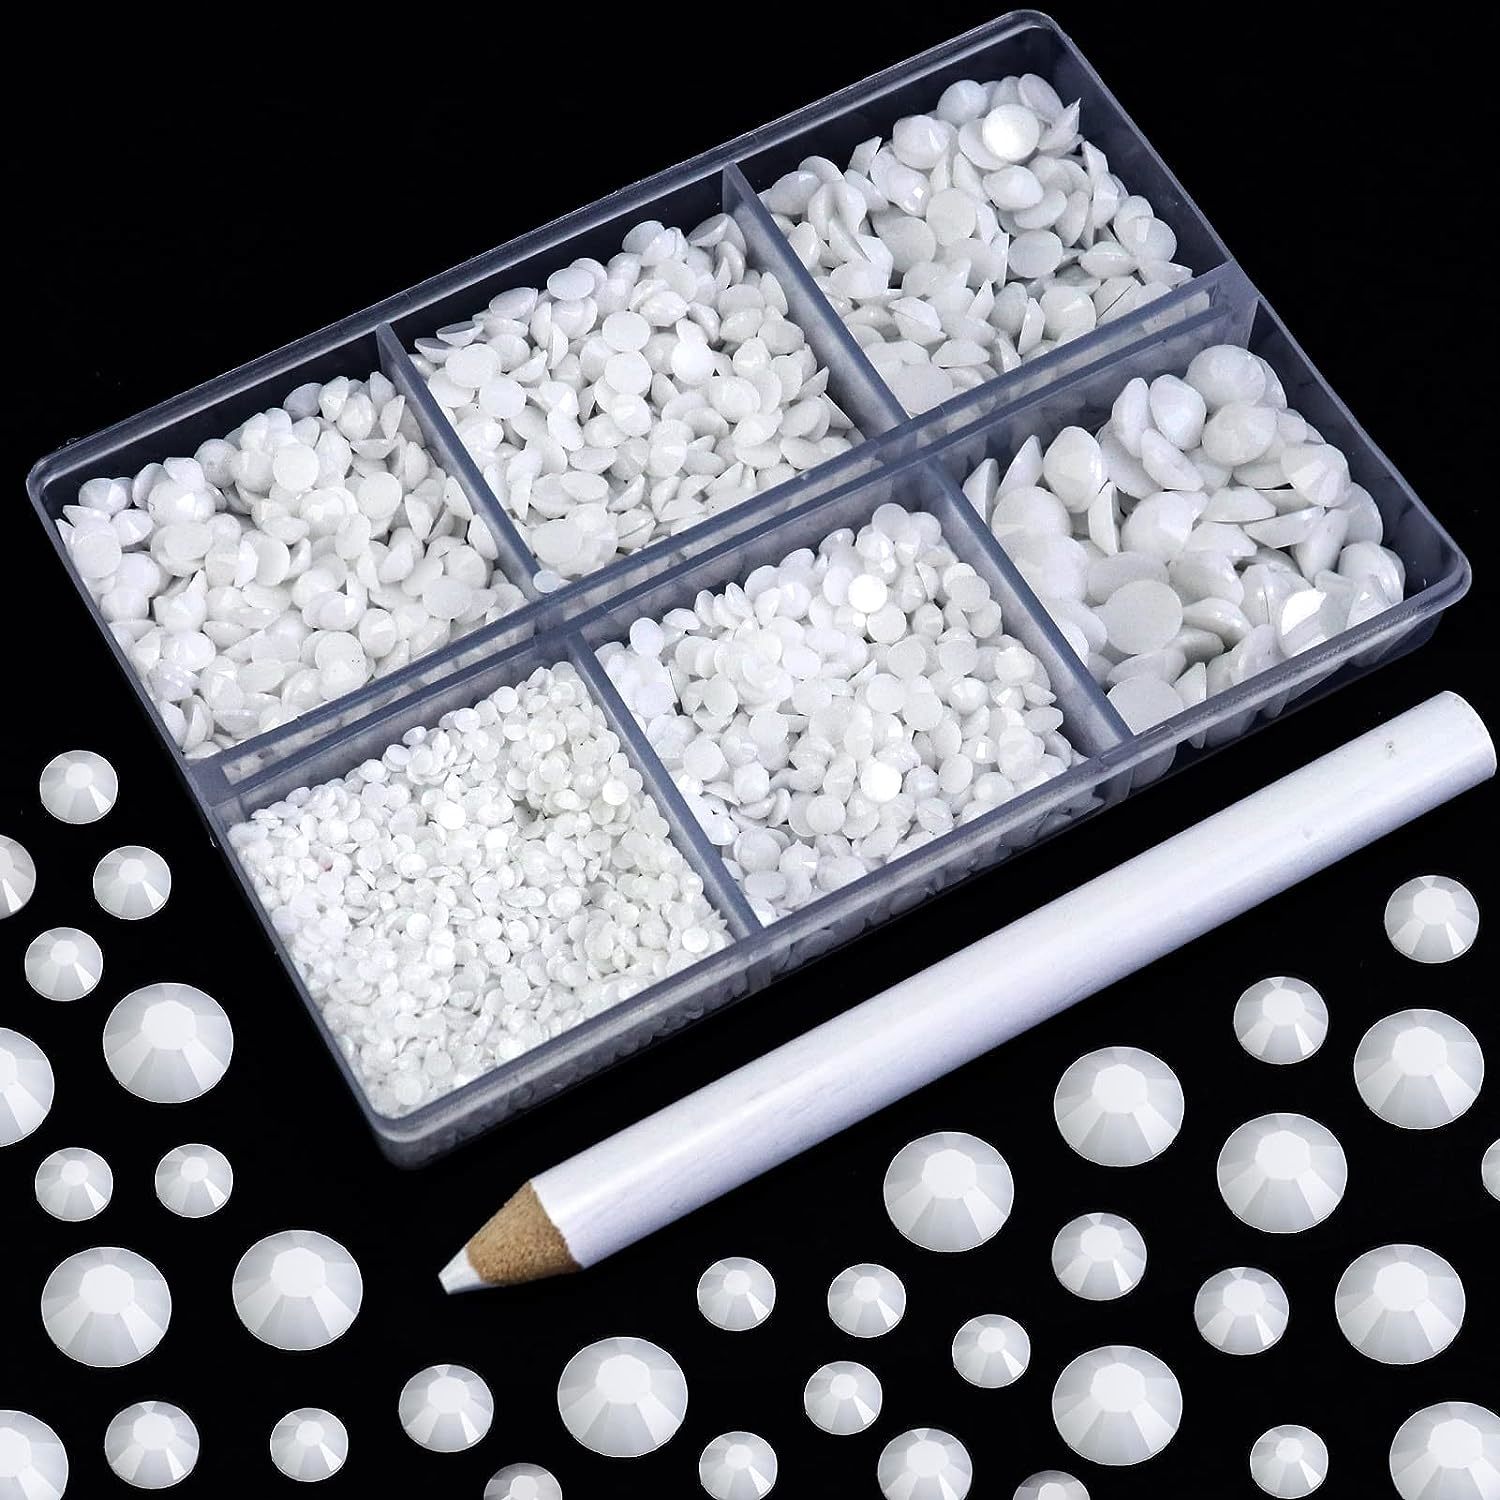 Primary image for 4500Pcs Resin Flatback Rhinestone, 2Mm 3Mm 4Mm 5Mm 6Mm Solid White Flatback Rhin